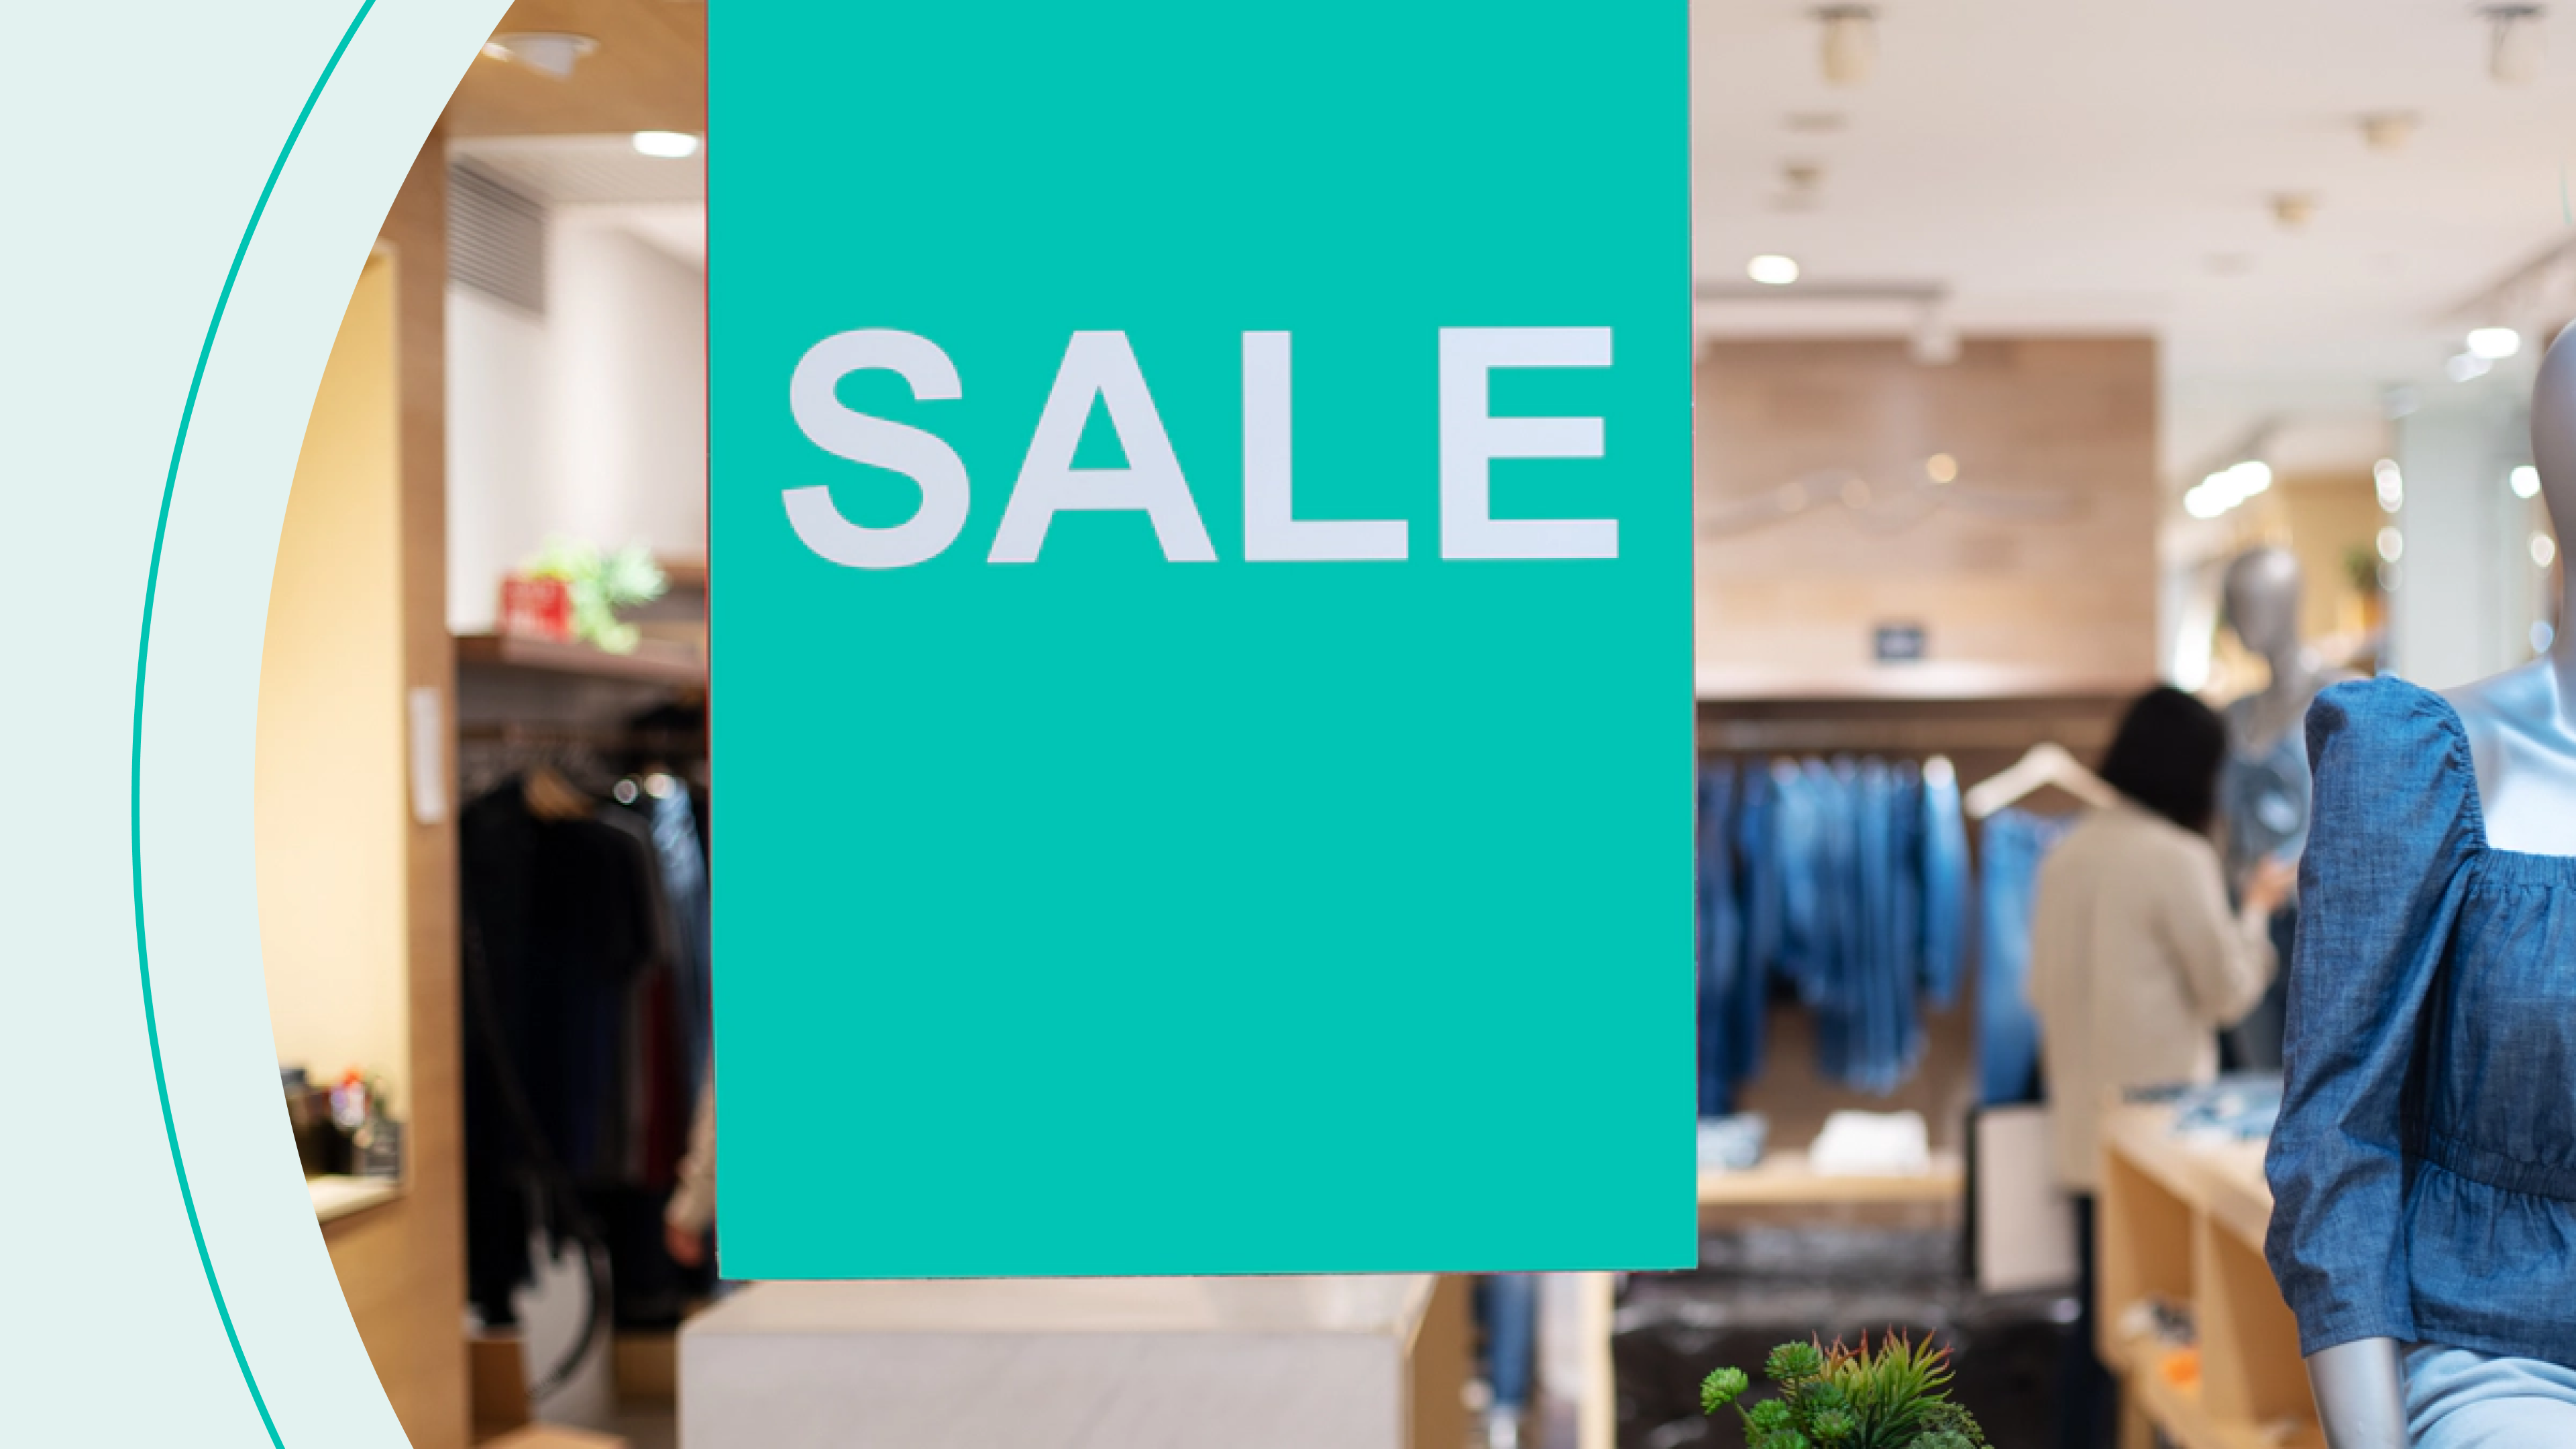 A sale sign in a clothing shop 